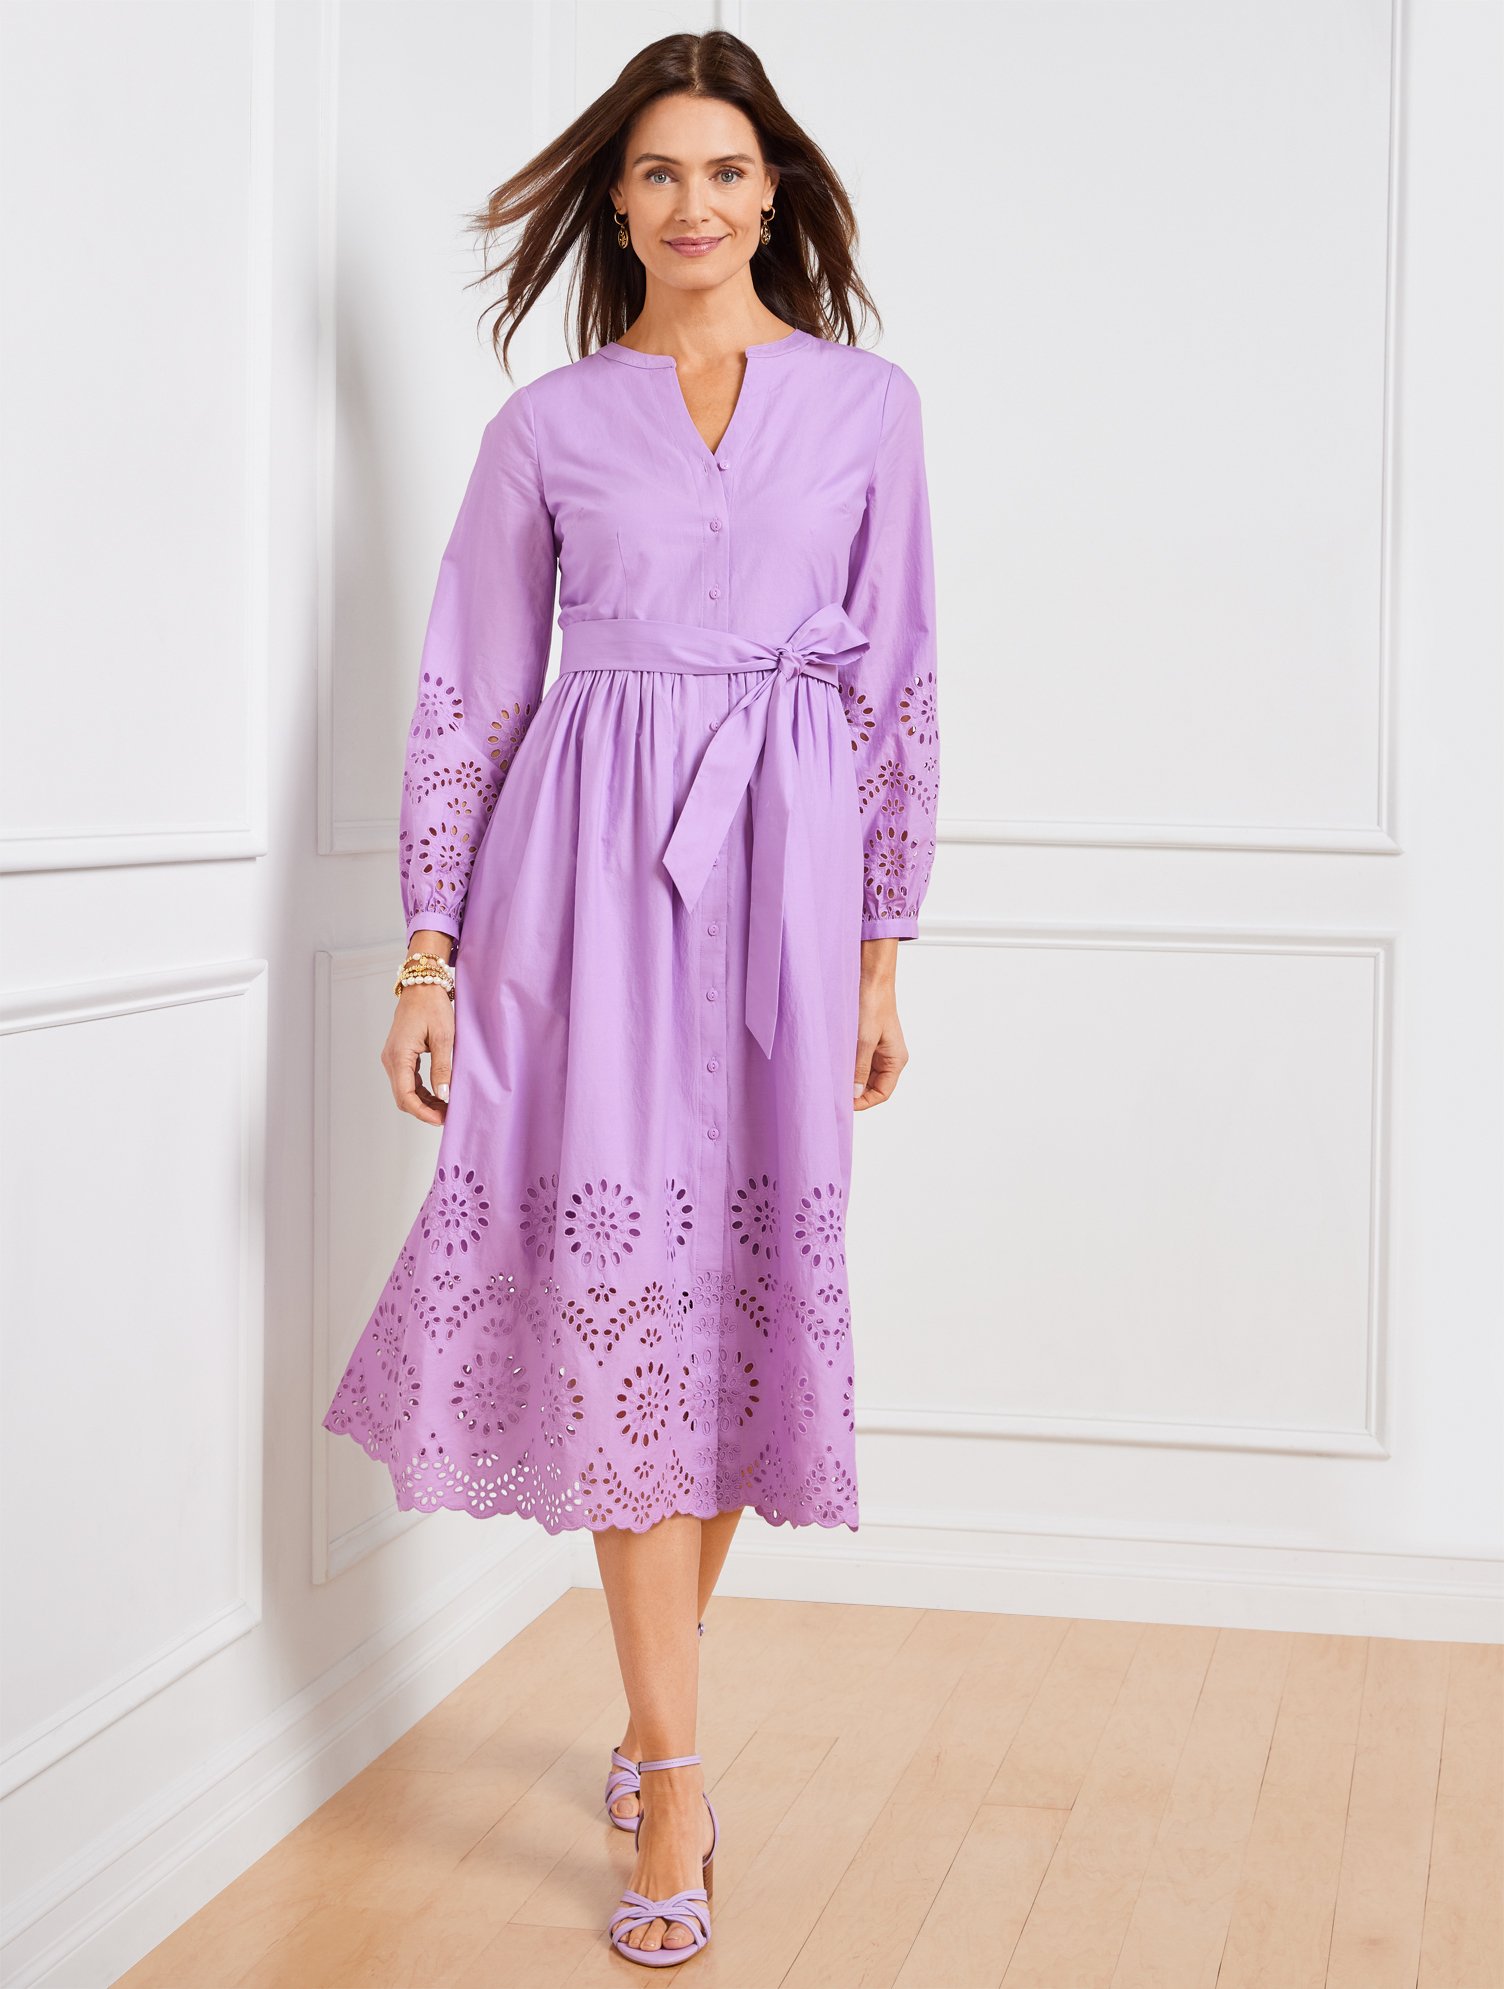 Talbots Placed Eyelet Fit & Flare Shirtdress - Wisteria Purple - 20 - 100% Cotton